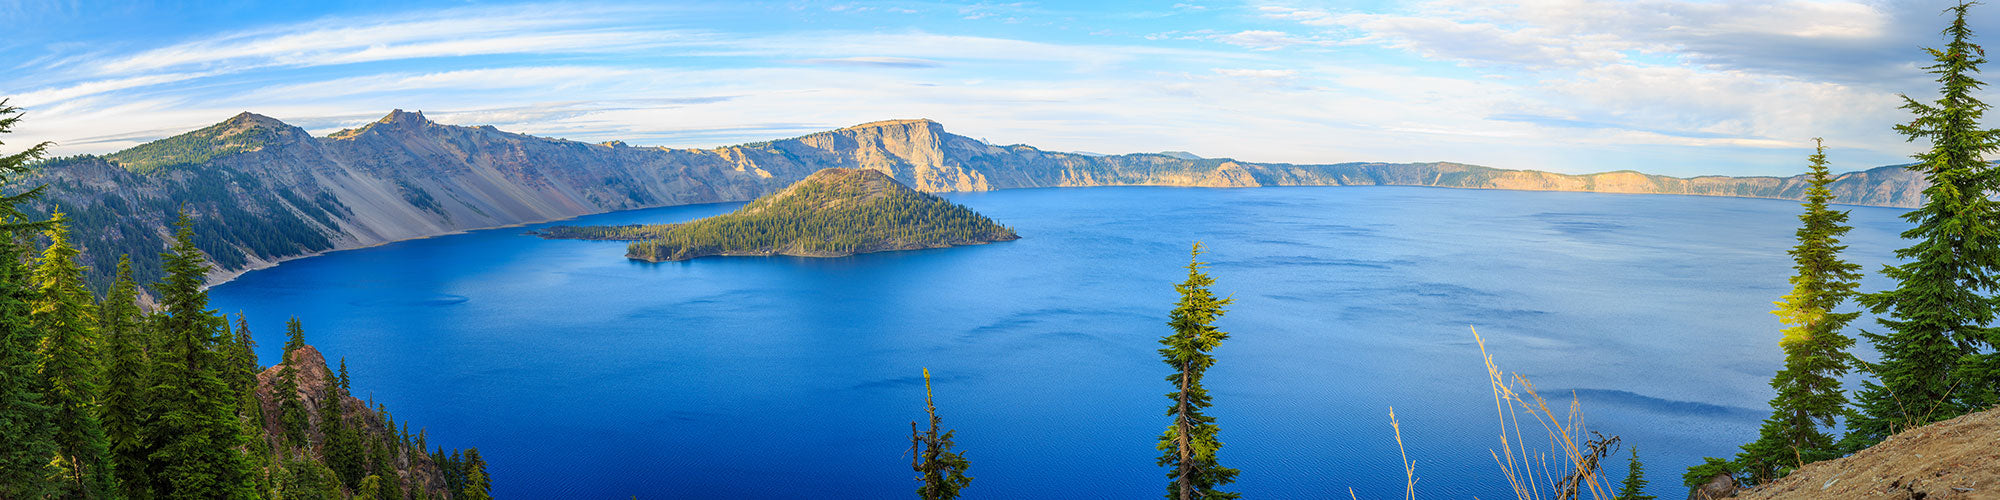 Fine Art Photography Prints of Crater Lake - Satellite Images of Earth - Point Two Design